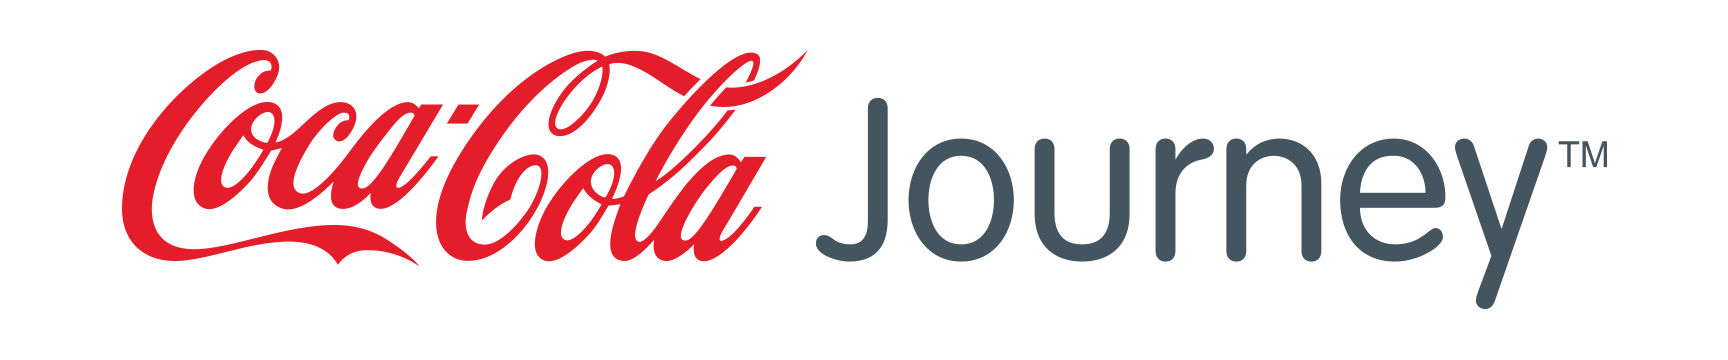 Coca-Cola Journey - Logo - https://s39939.pcdn.co/wp-content/uploads/2018/11/Content-Marketing-Brand-Journalism-2.png